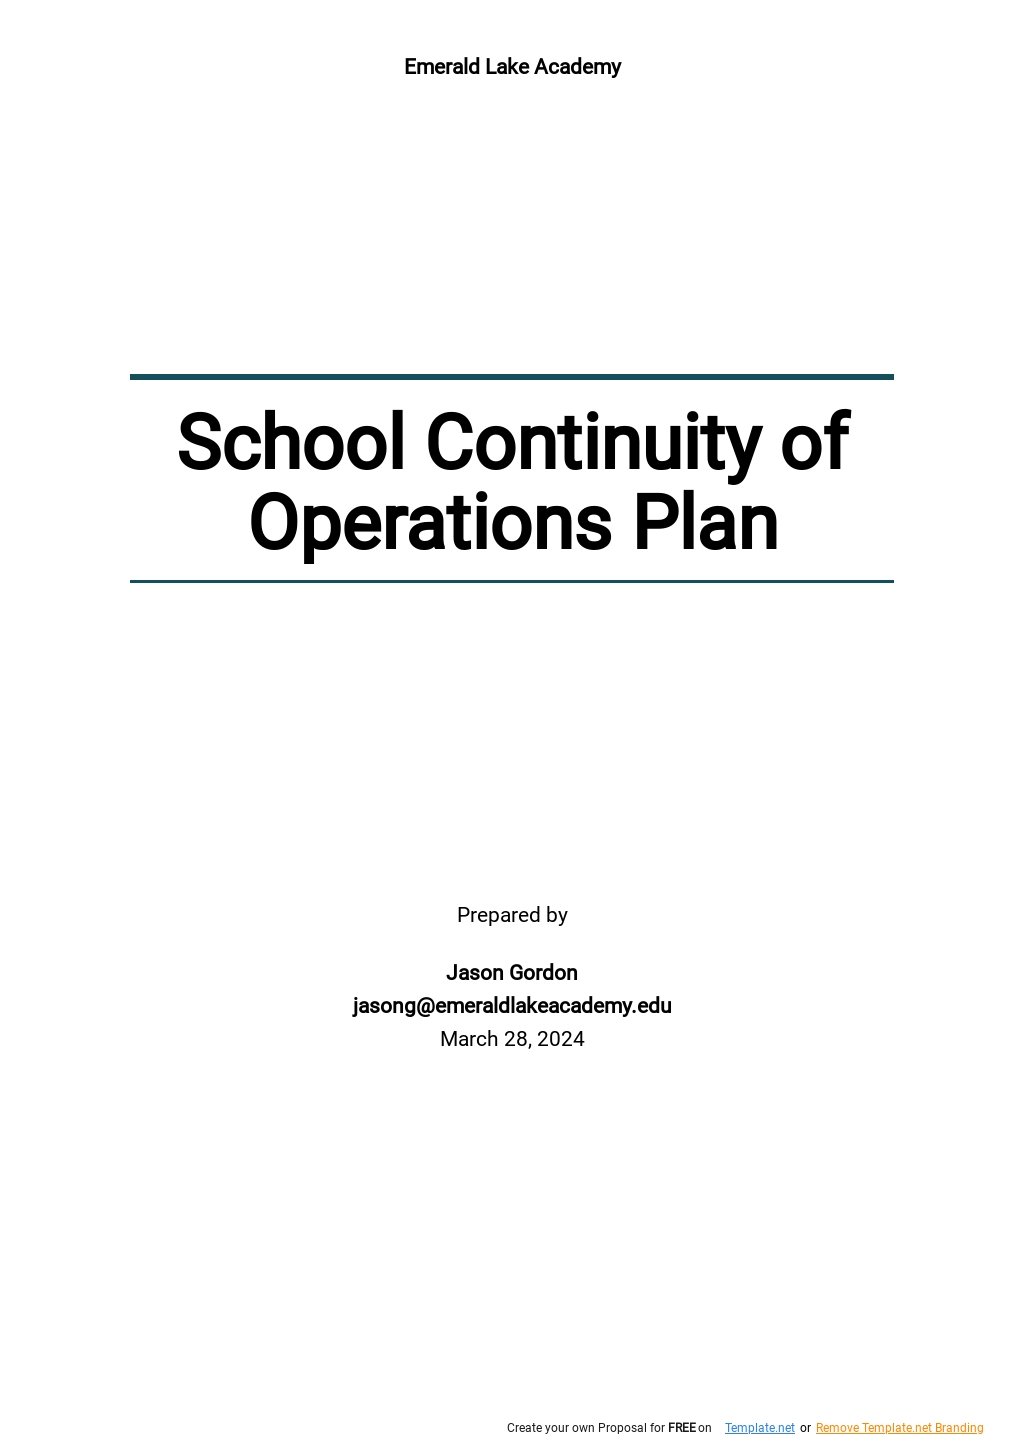 School Continuity of Operations Plan Template